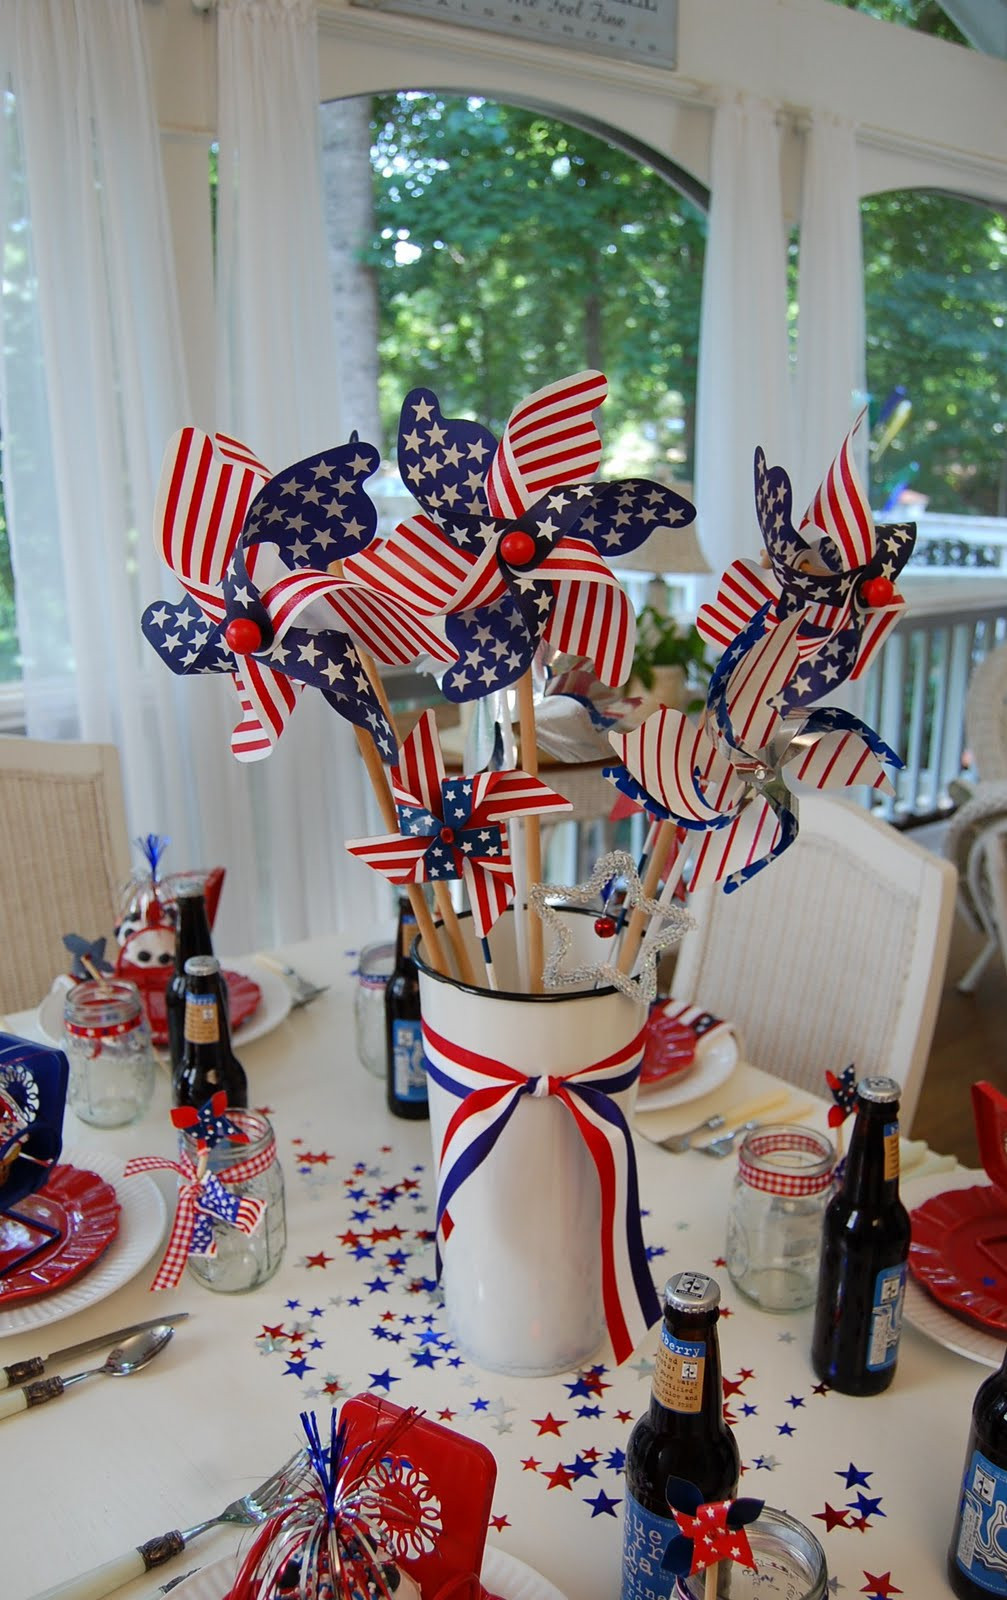 4th Of July Centerpiece Ideas
 A Patriotic Celebration Table Setting